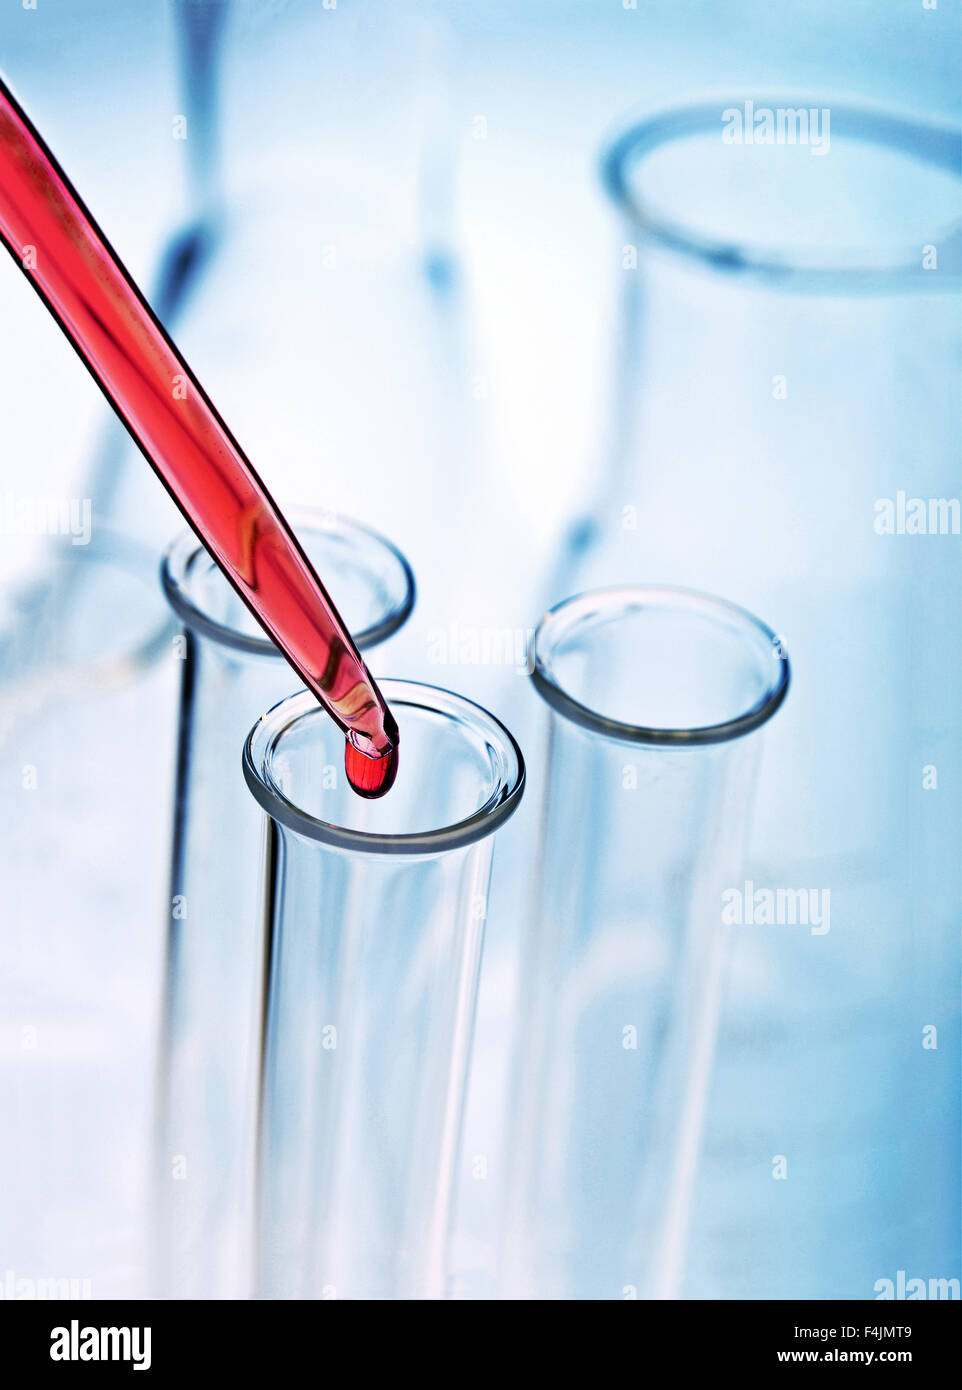 Laboratory detail with pipette and scales. Stock Photo